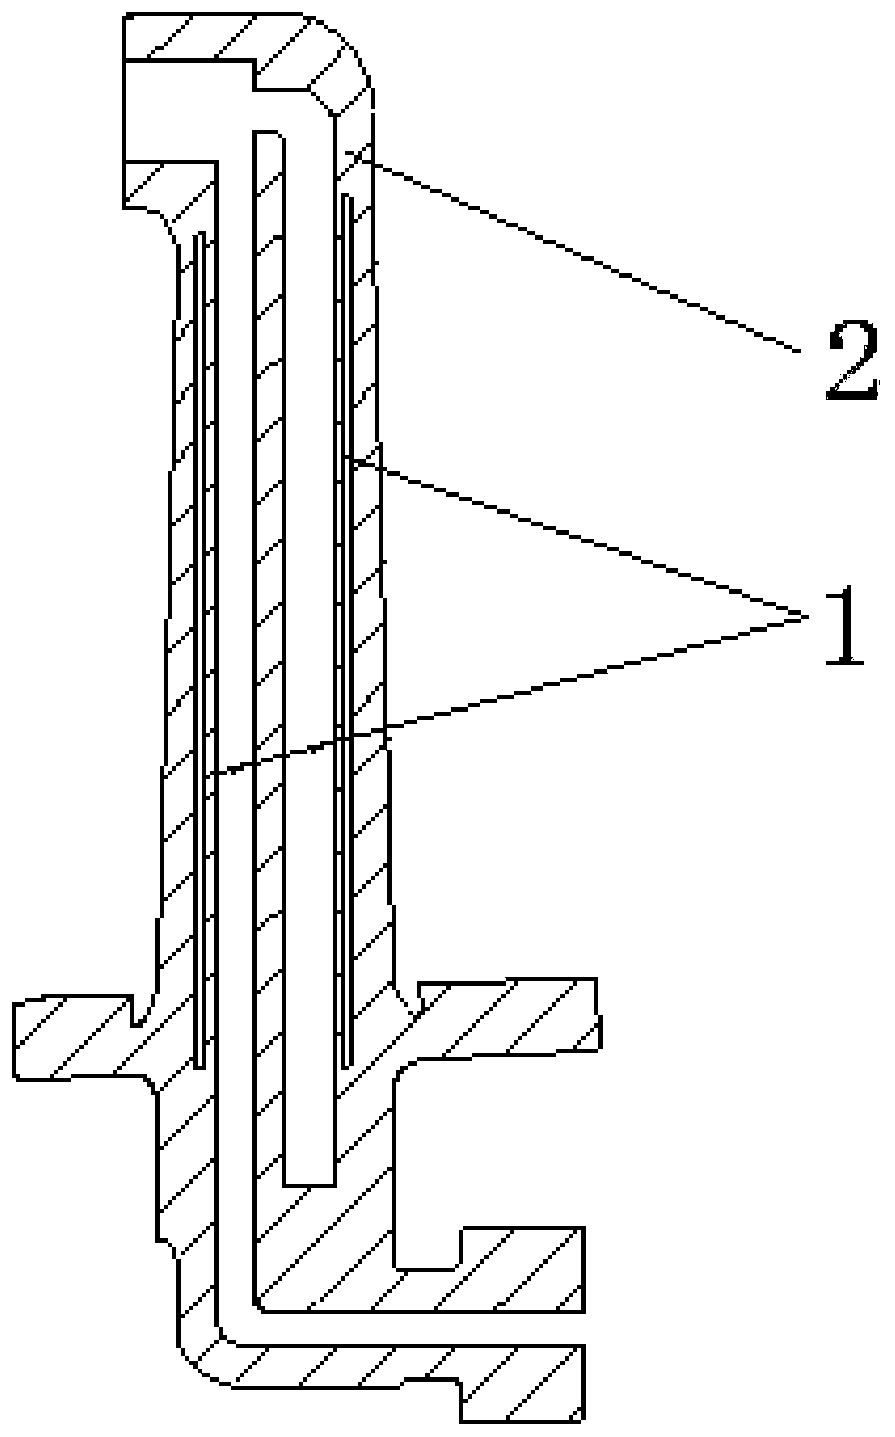 Nozzle shell selective laser melting forming method